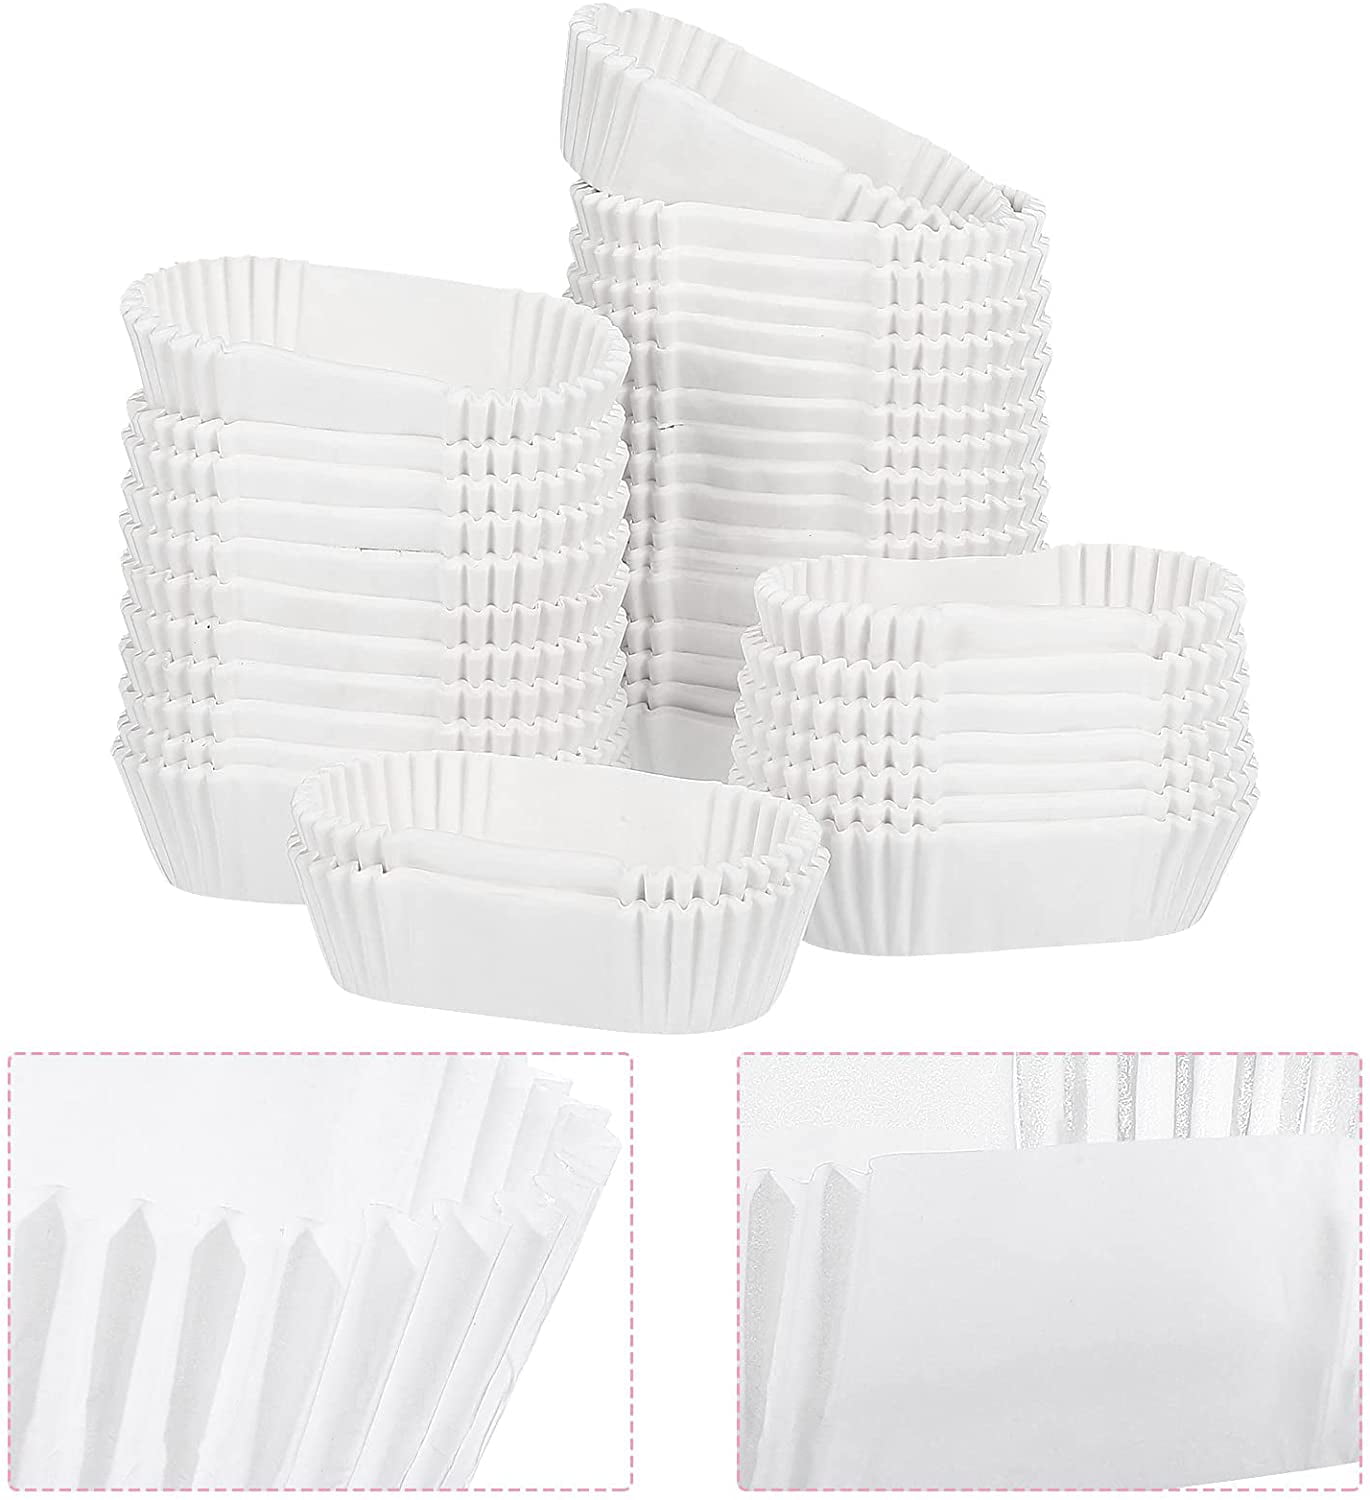 Happon 80 Pcs Baking Cupcake Liners Paper Cups Mini Cup Cake Loaf Pans Oval  Liner for Bread Muffin Papers Bowls Dessert Silicone Disposable 